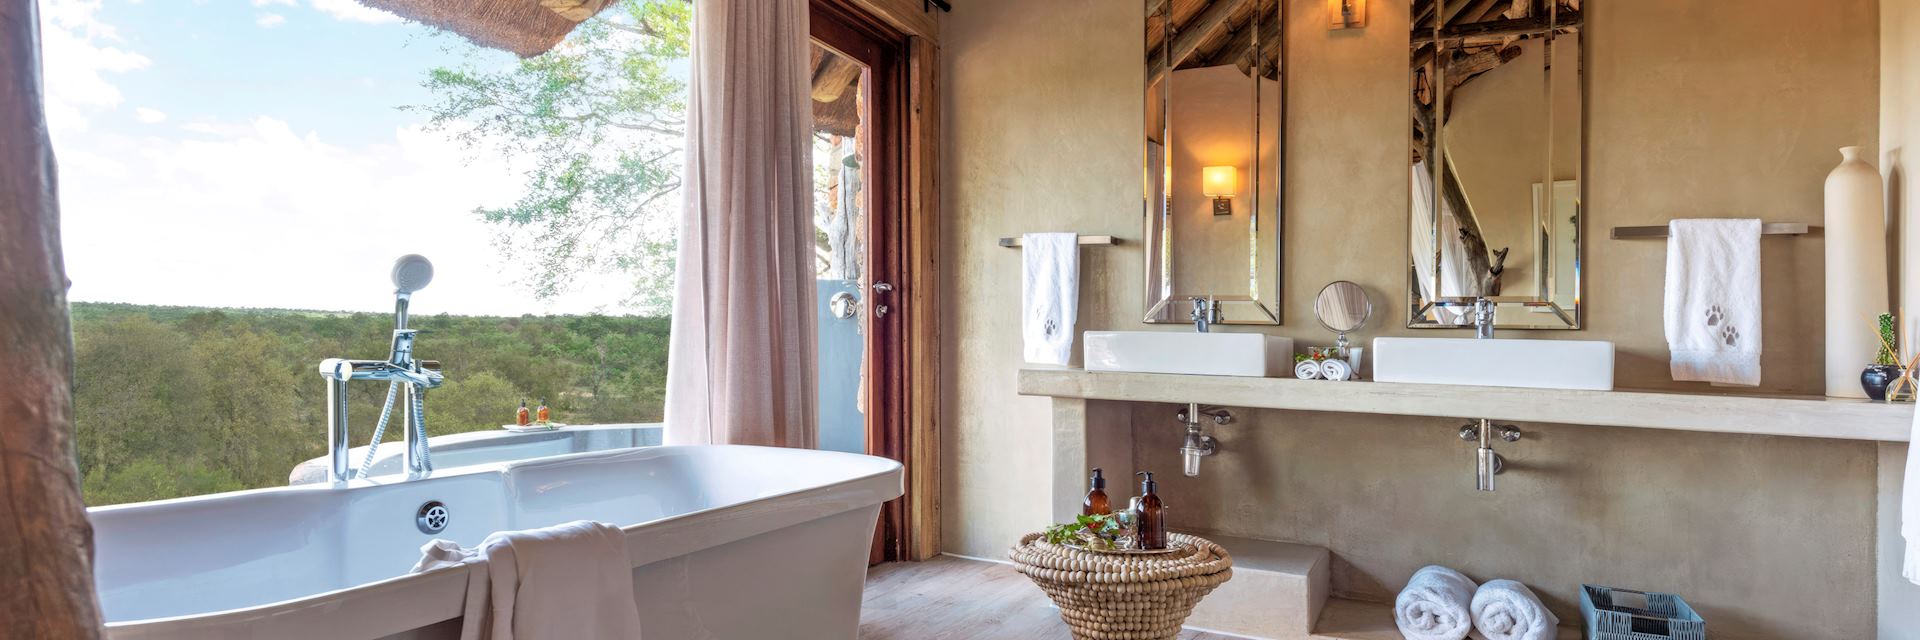 Suite bathroom at Leopard Hills Private Game Reserve